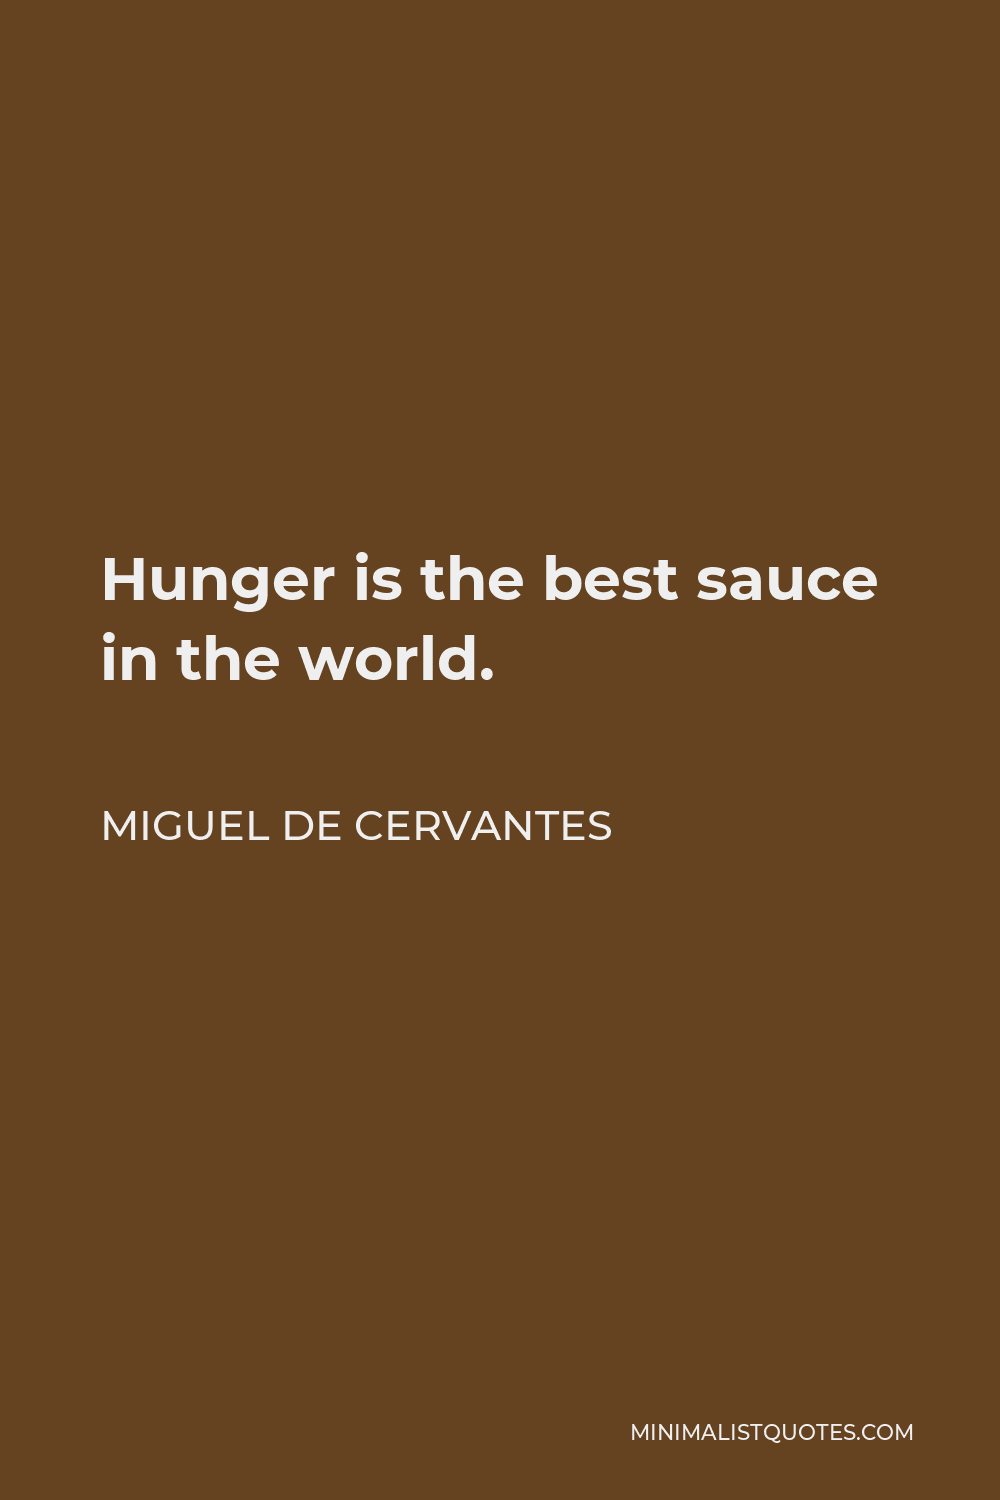 Miguel de Cervantes Quote - Hunger is the best sauce in the world.